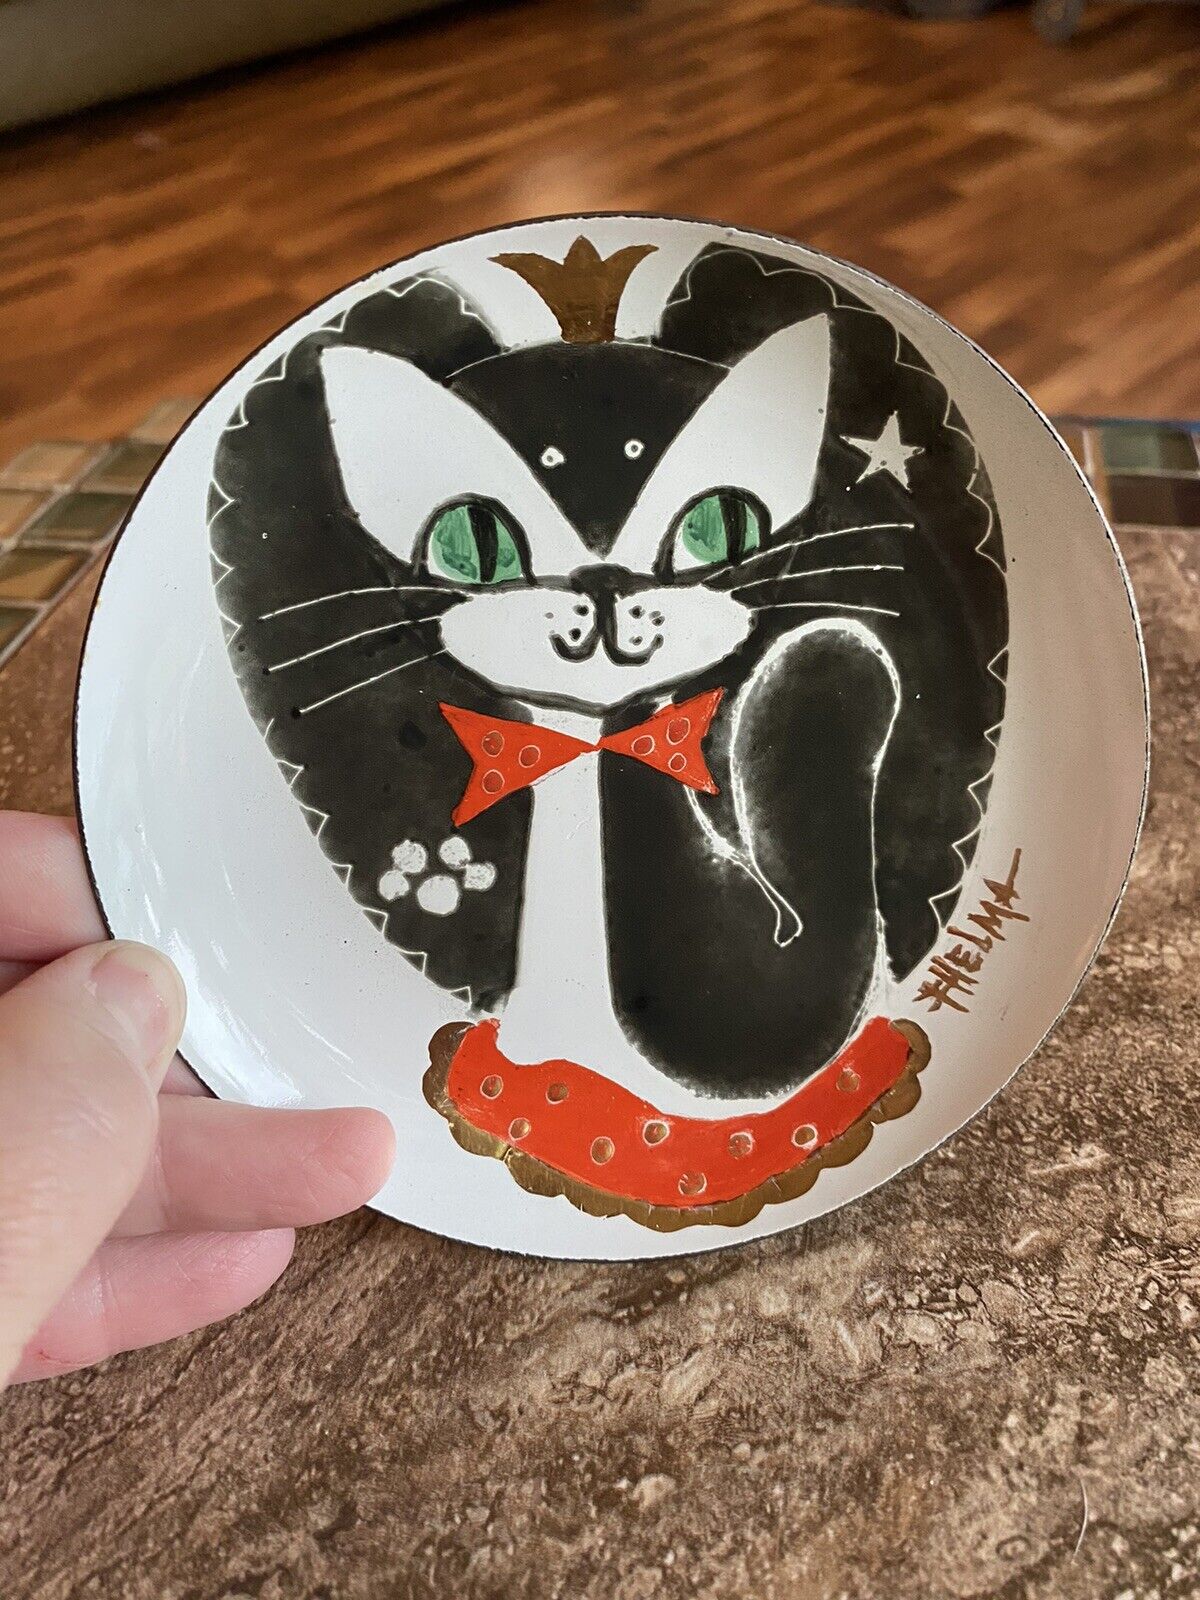 Thelma Frazier Winter Vintage Enamelware 4 3/4” Plate Cat Wearing Crown RARE